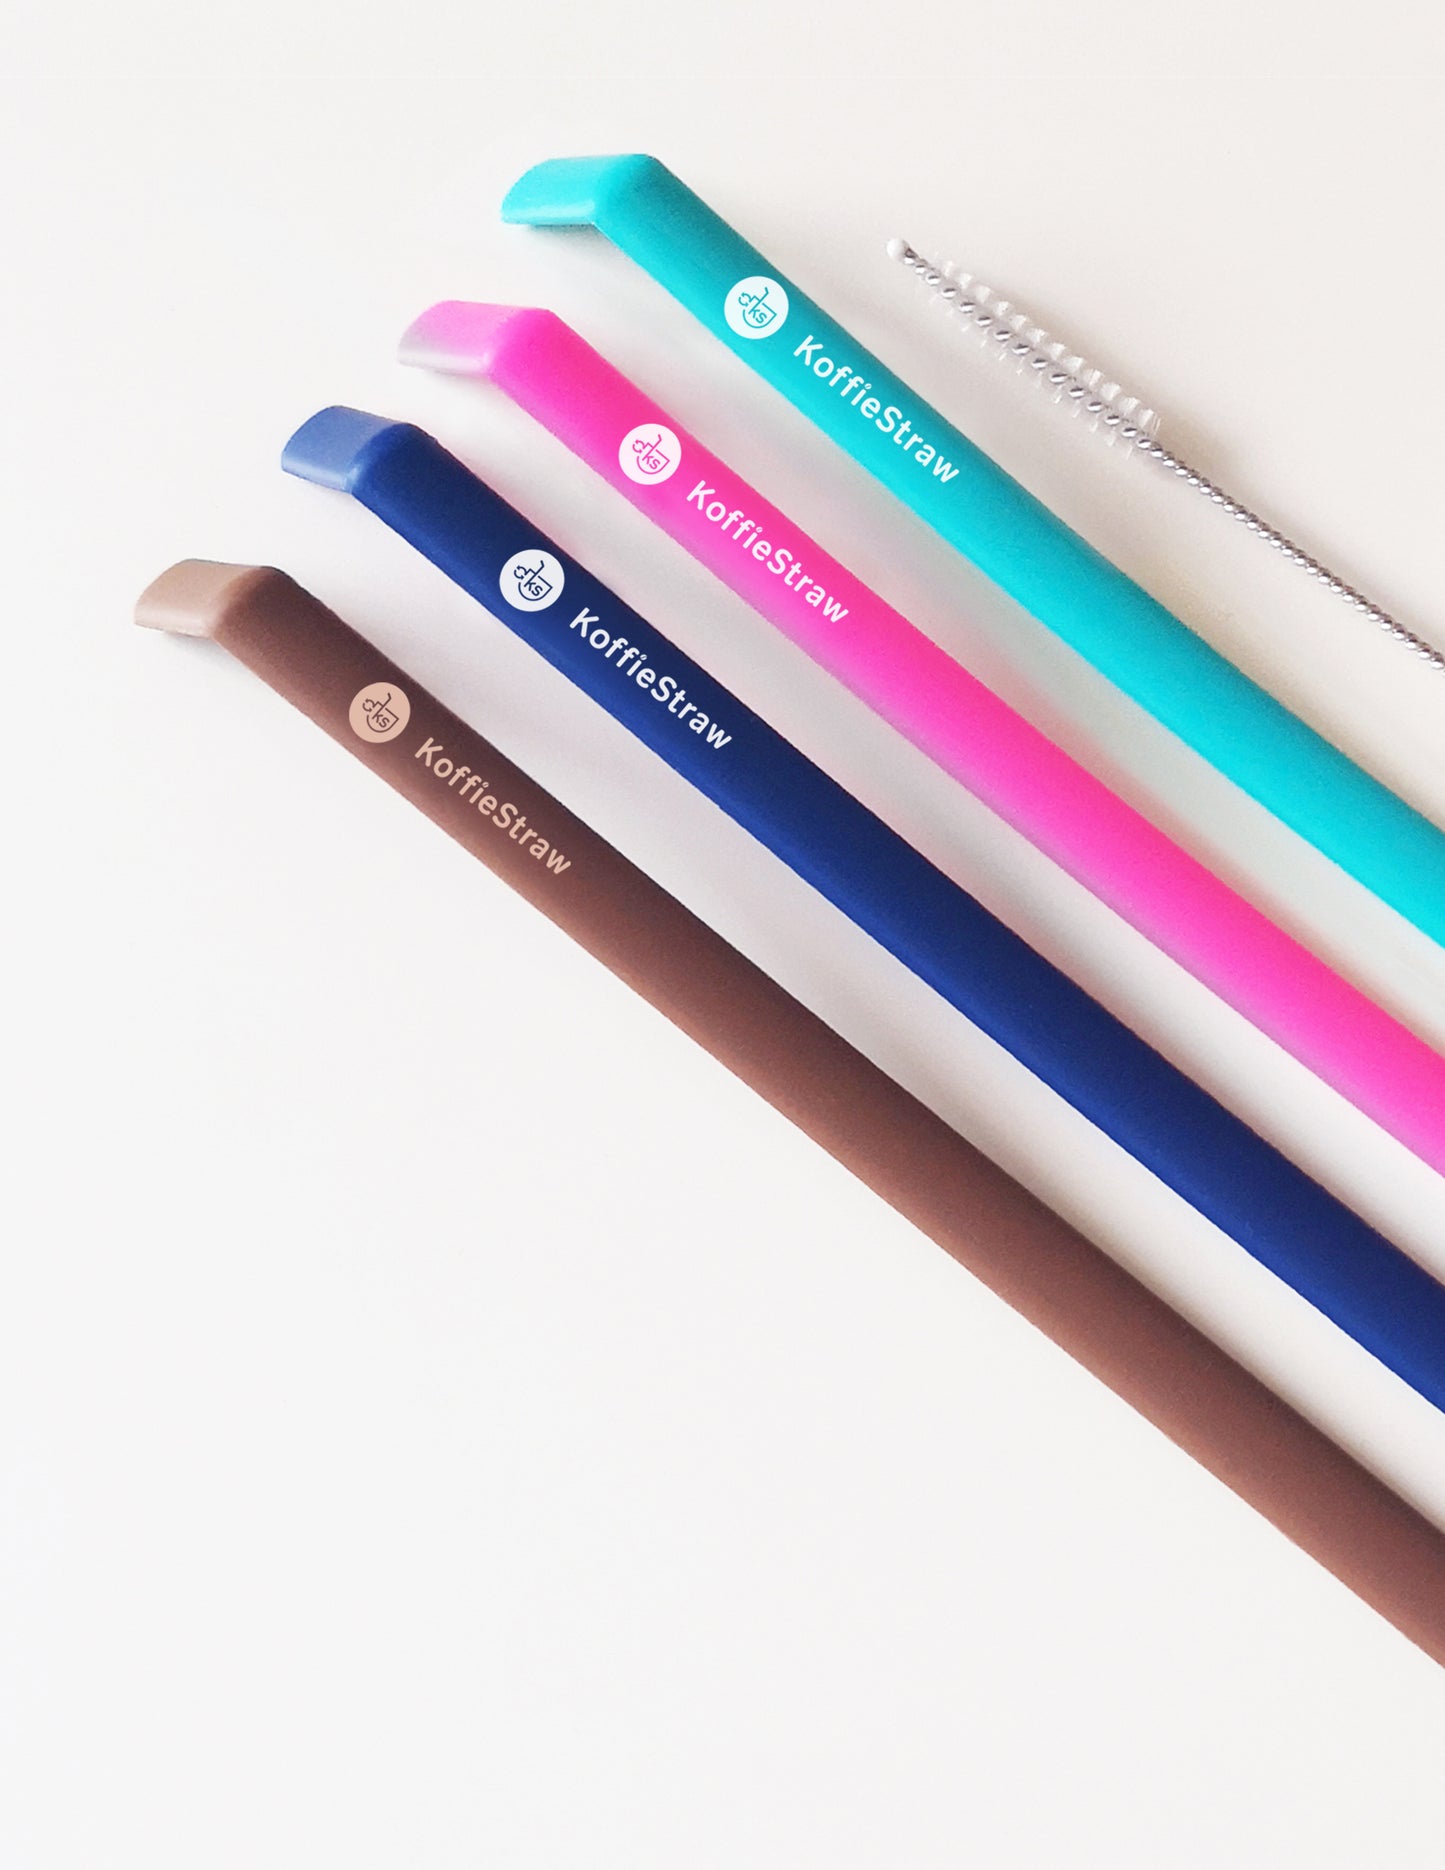 4-Pack of KoffieStraw: Mocha, Navy, Pink, Surf (all 10") with stainless steel cleaning brush in home-compostable packaging